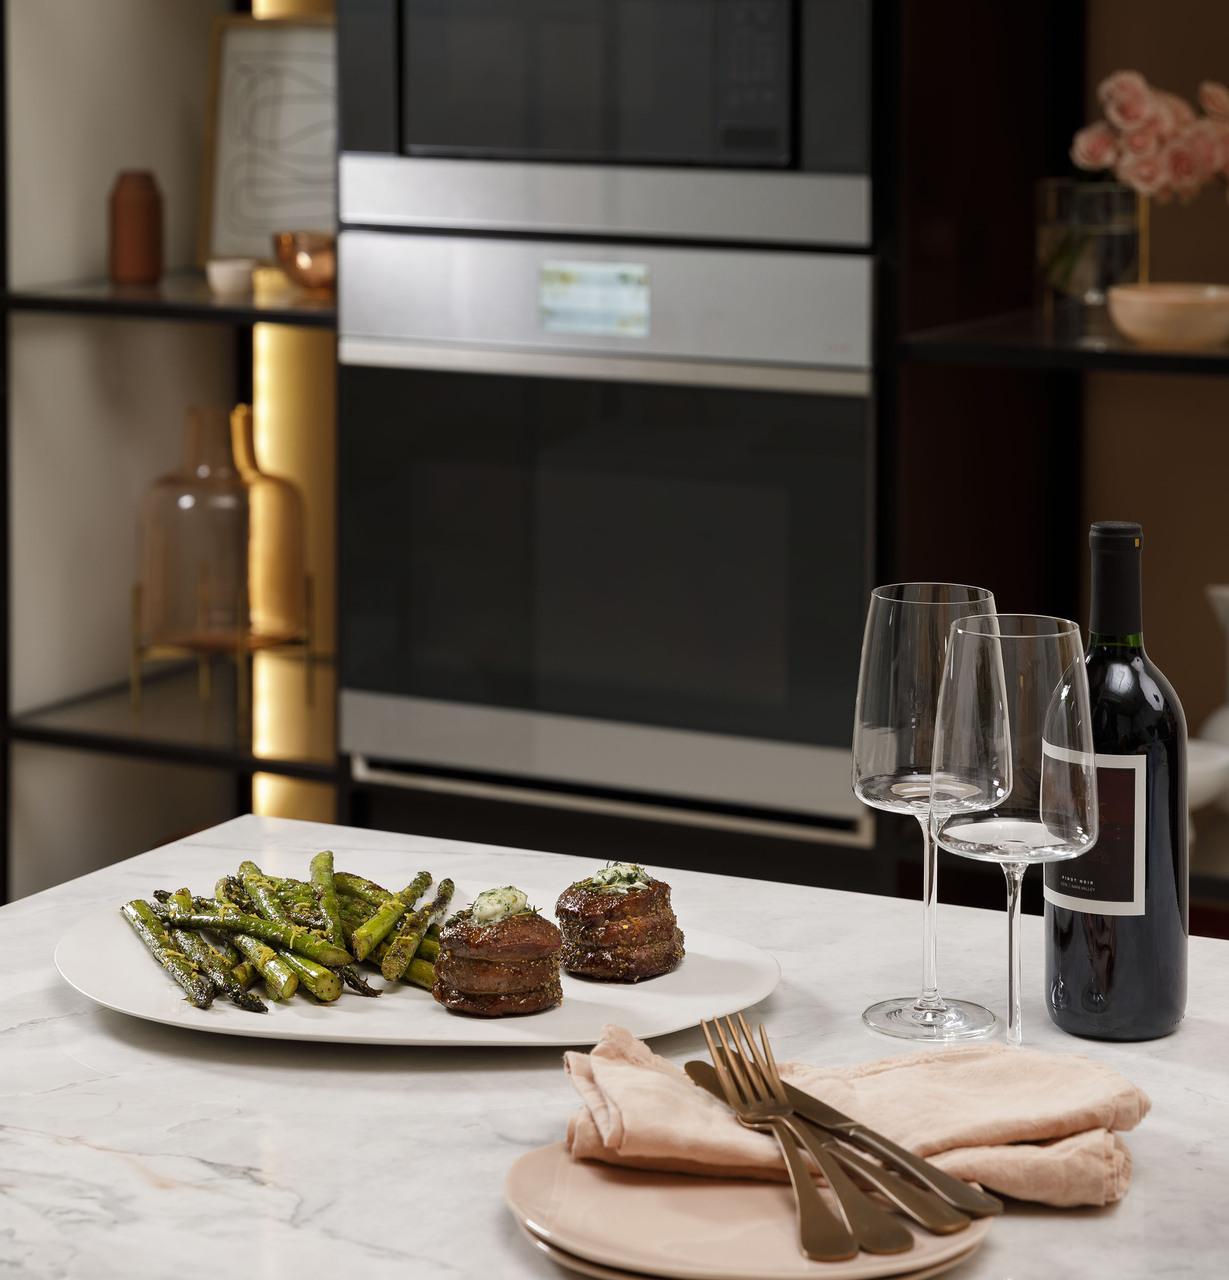 Cafe CTD90DM2NS5 Café&#8482; Minimal Series 30" Smart Built-In Convection Double Wall Oven In Platinum Glass